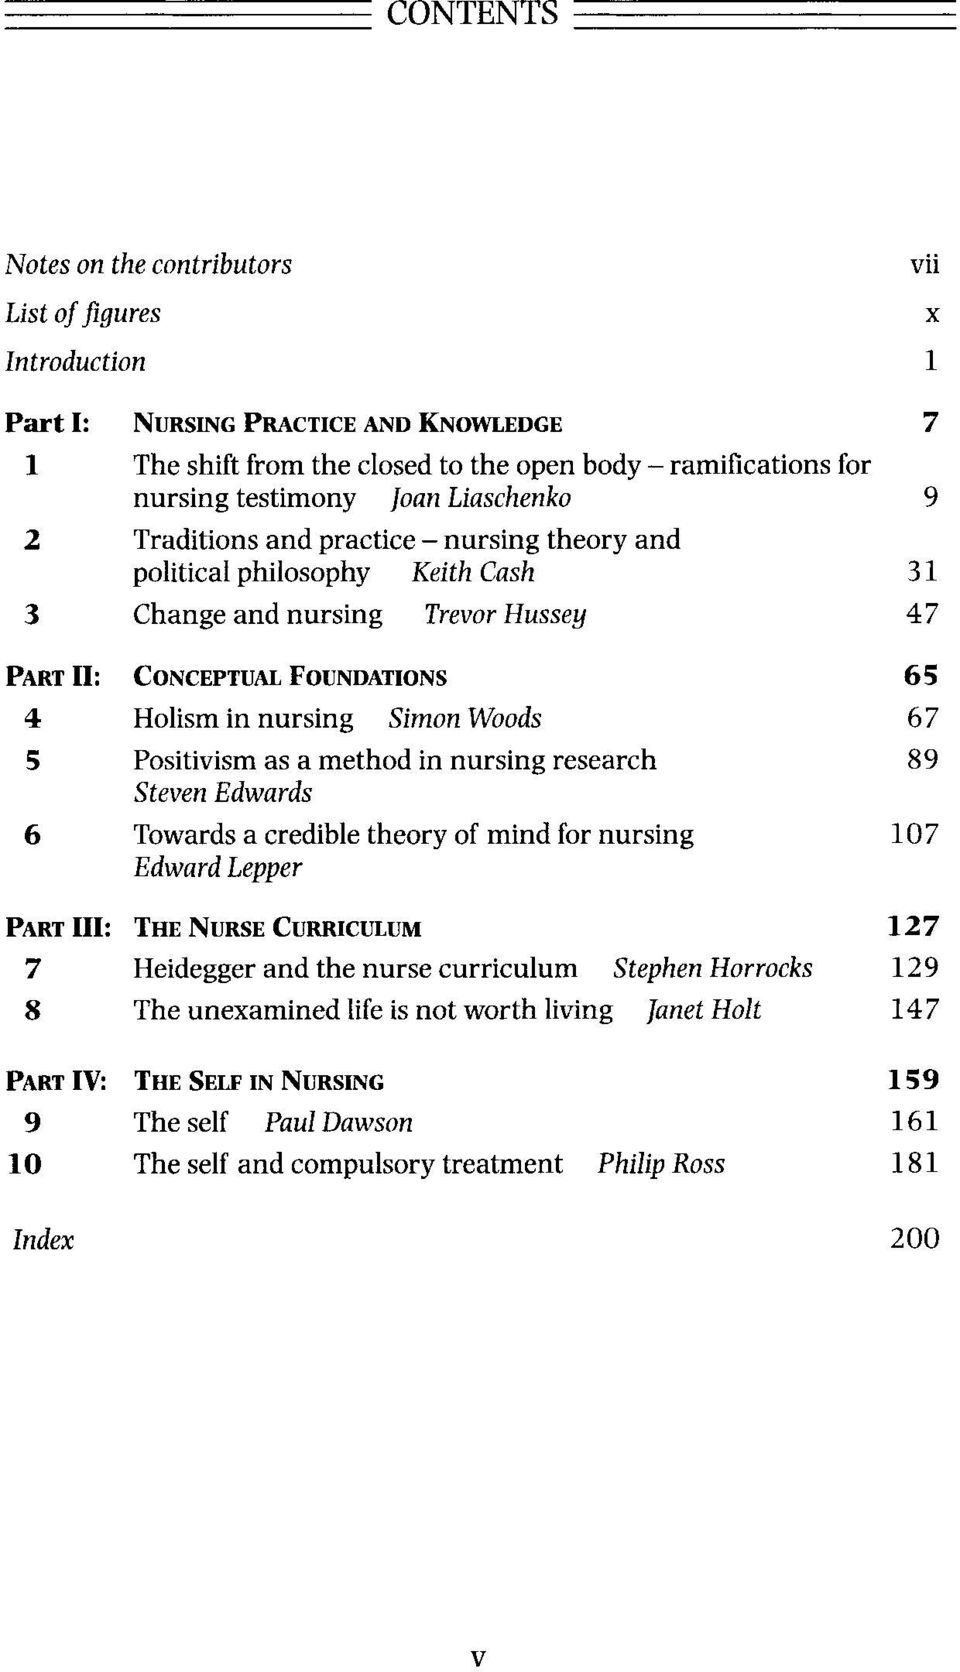 Holism in nursing Simon Woods Positivism as a method in nursing research Steven Edwards Towards a credible theory of mind for nursing Edward Lepper 65 67 89 107 PART III: THE NURSE CURRICULUM 127 7